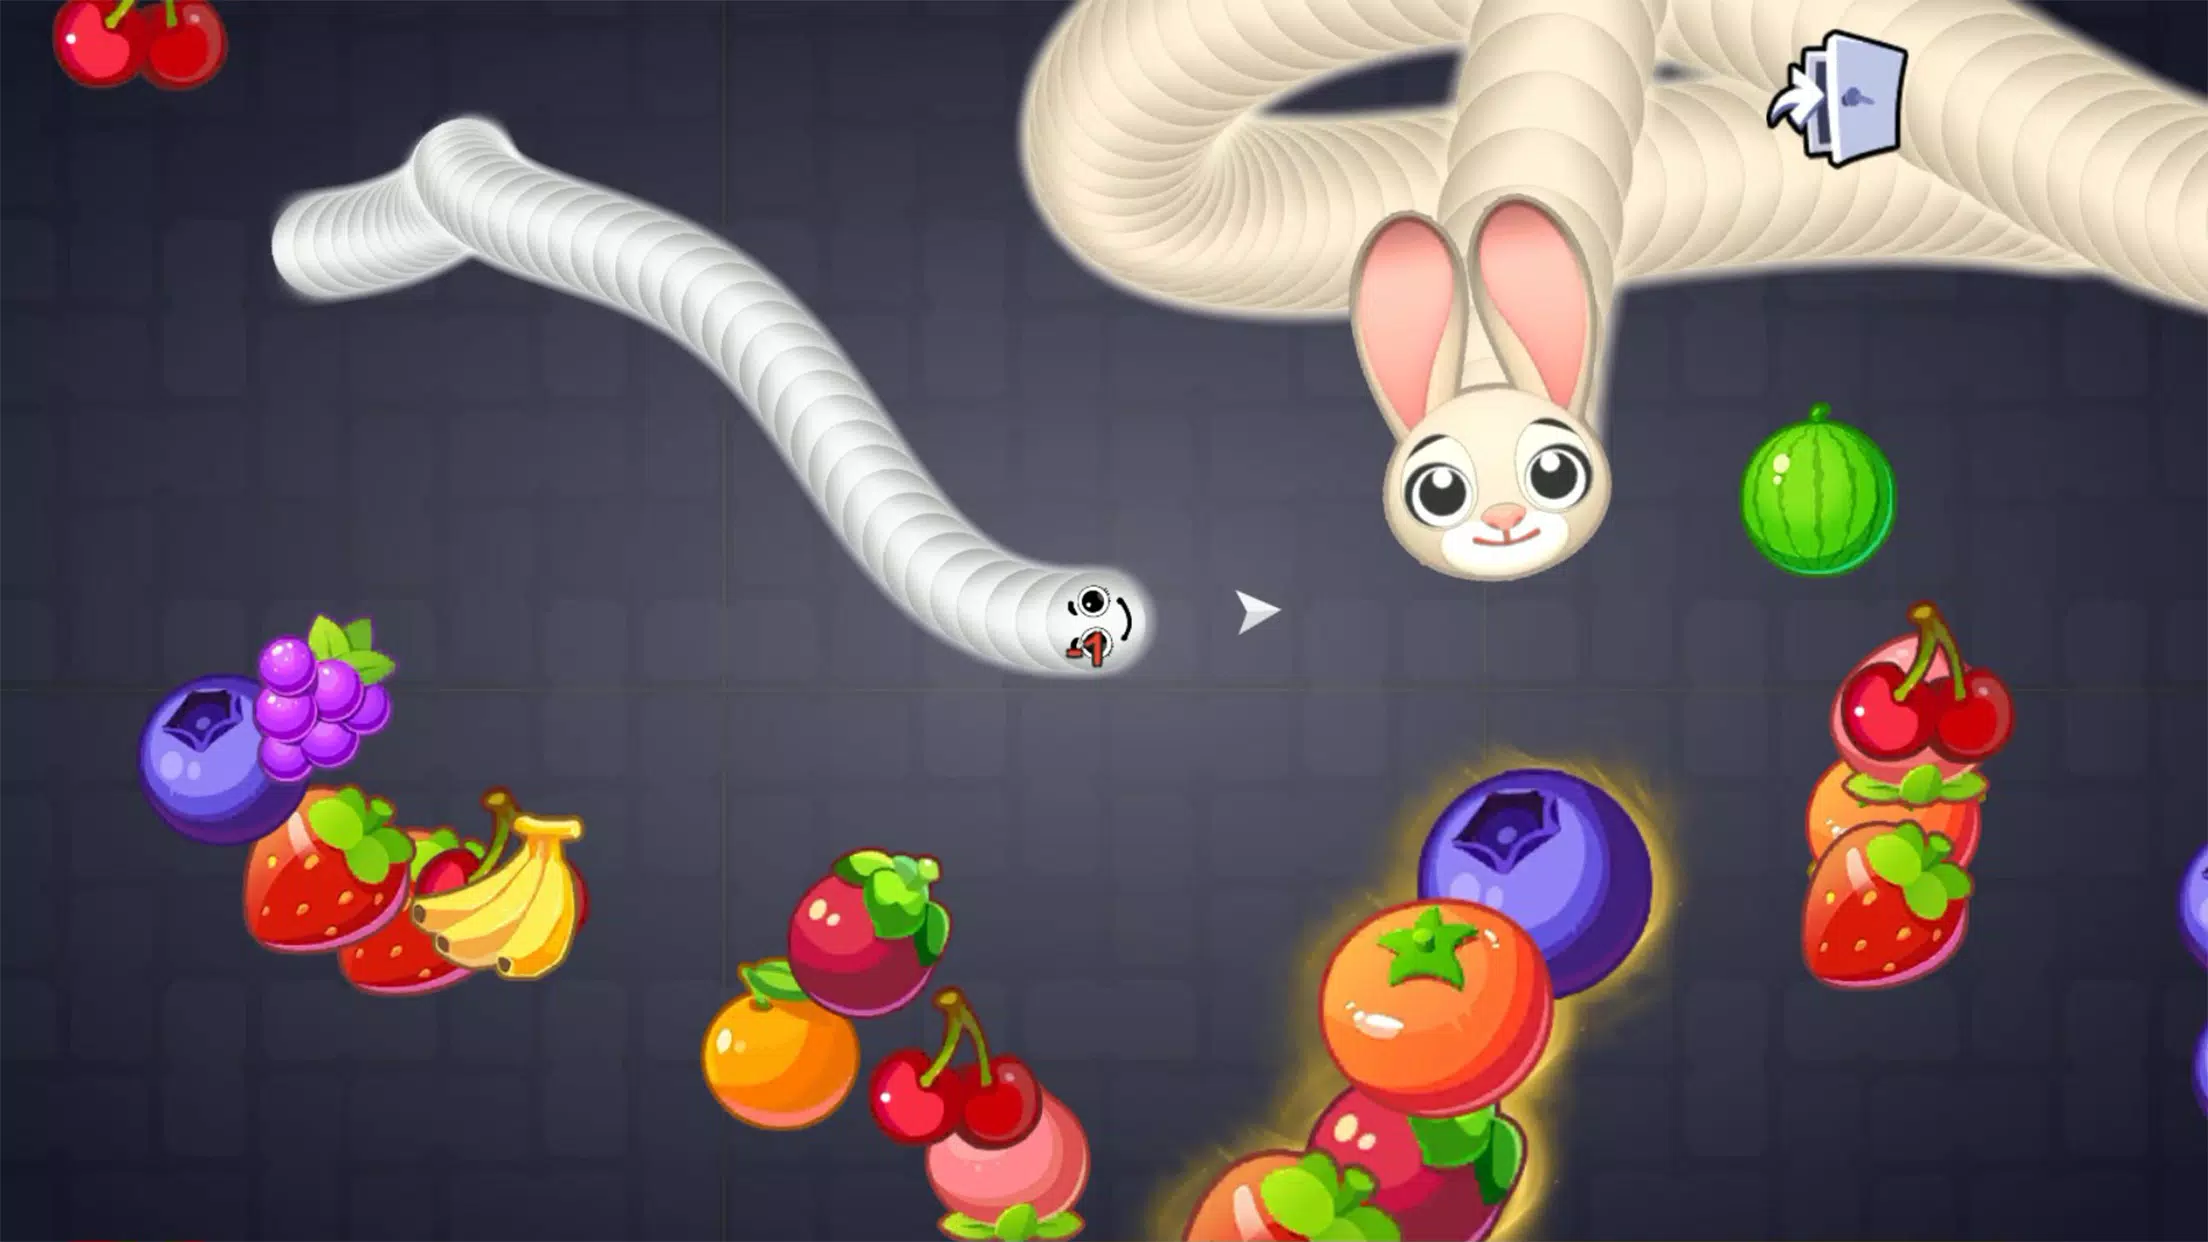 SNAKE VS WORMS - Play Online for Free!